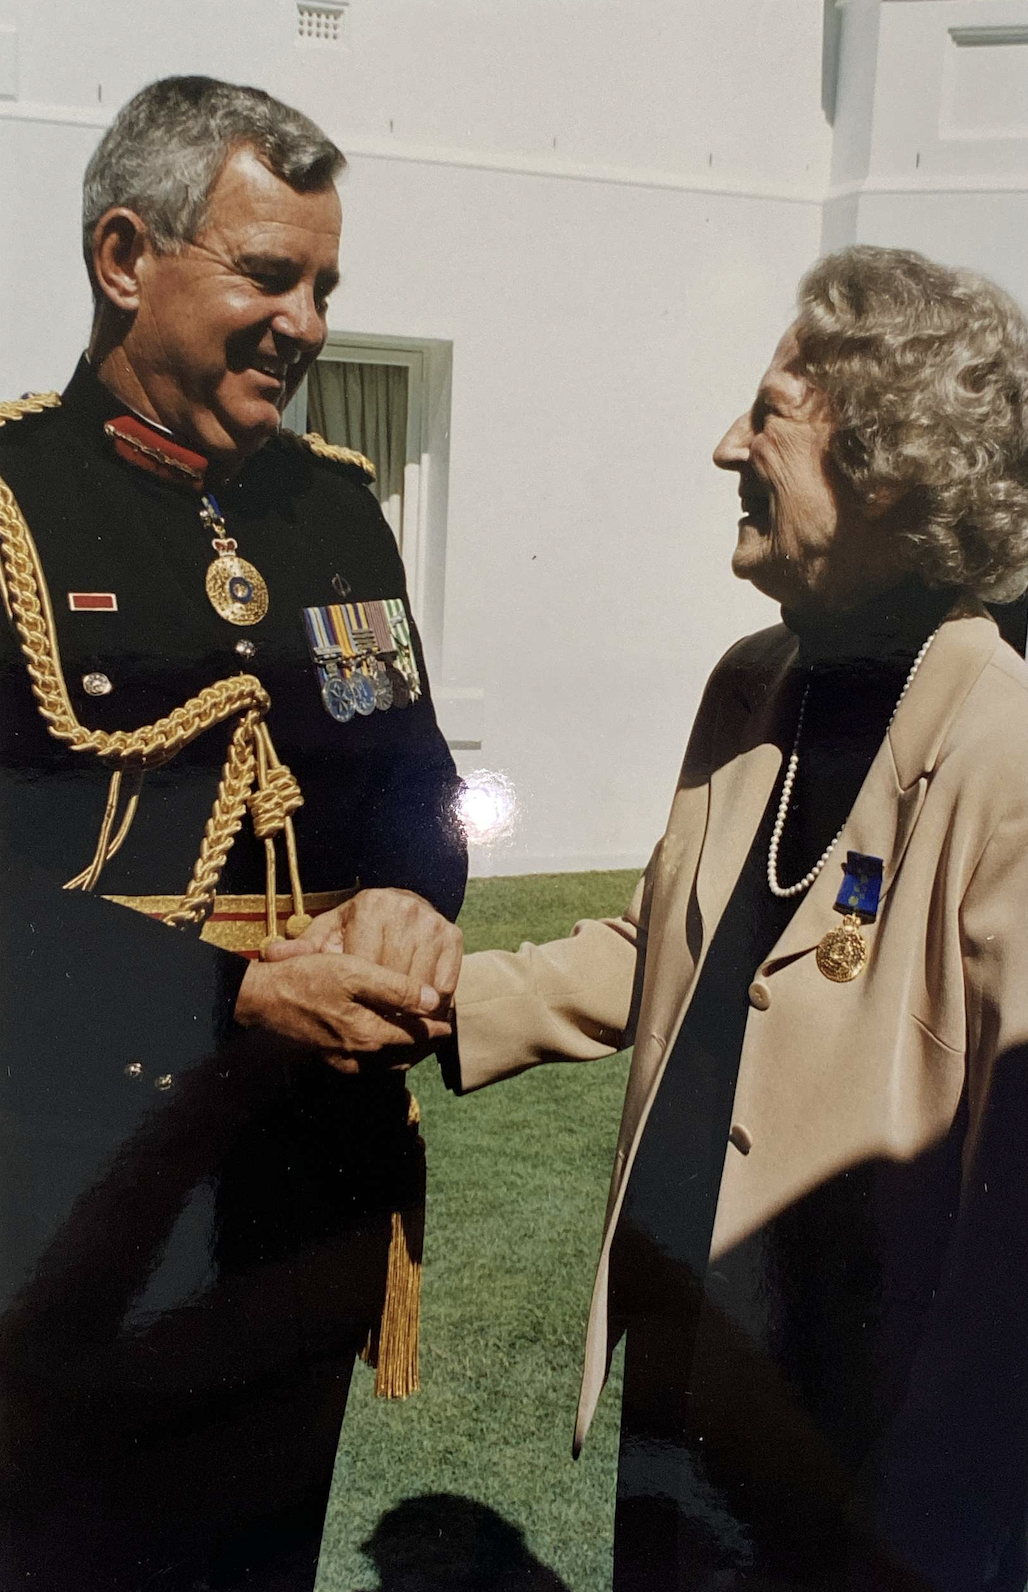 Christina Boughen with Major General the Honourable Peter Arnison AC CVO, 2002. 32654/40 Christina Boughen OAM and Robert Boughen OBE papers, John Oxley Library, State Library of Queensland.